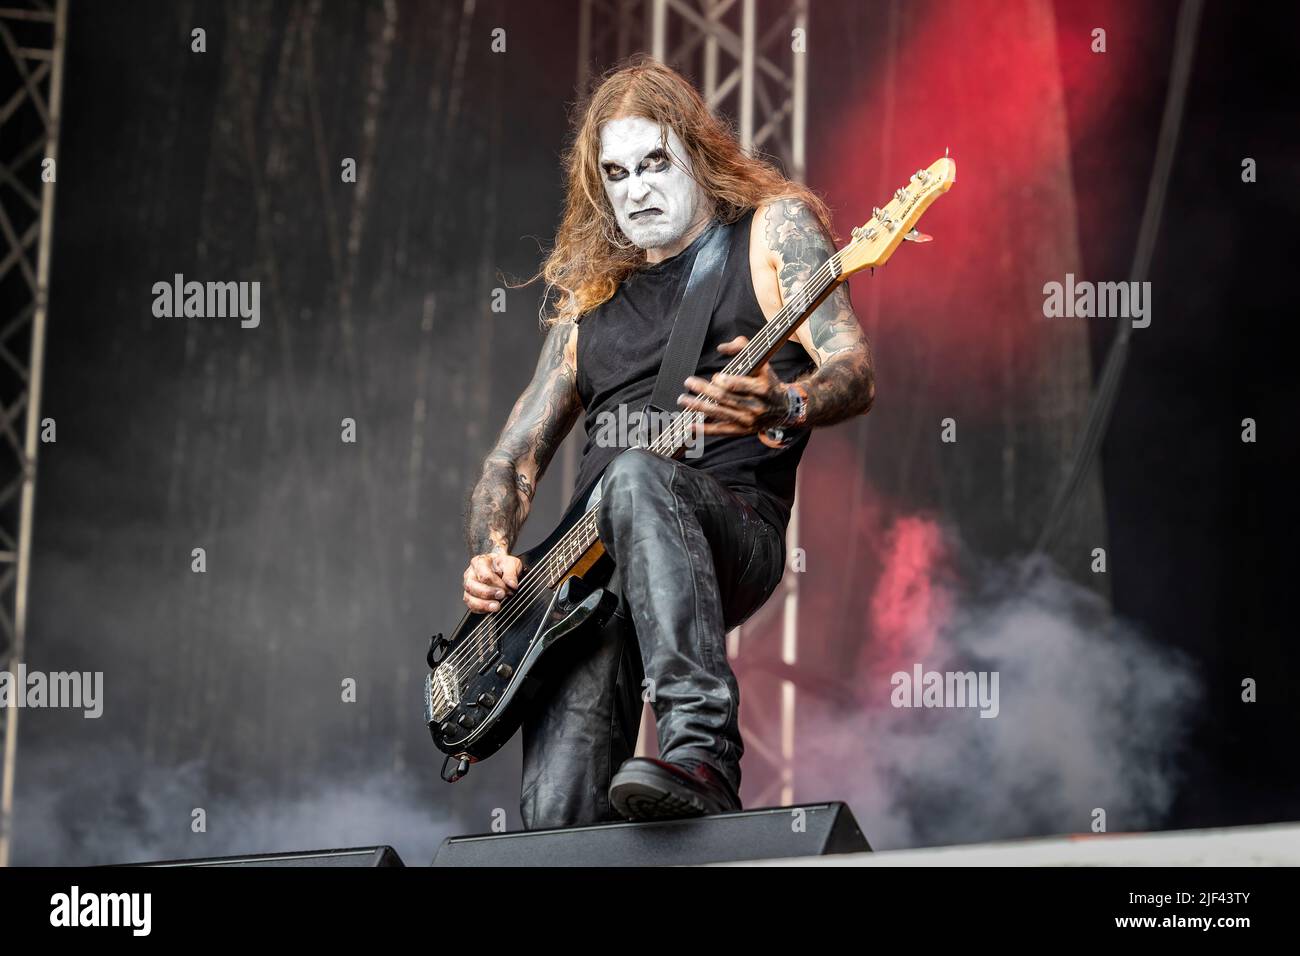 Oslo, Norway. 25th, June 2022. The Norwegian black metal band Abbath performs a live concert during the Norwegian music festival Tons of Rock 2022 in Oslo. (Photo credit: Gonzales Photo - Terje Dokken). Stock Photo